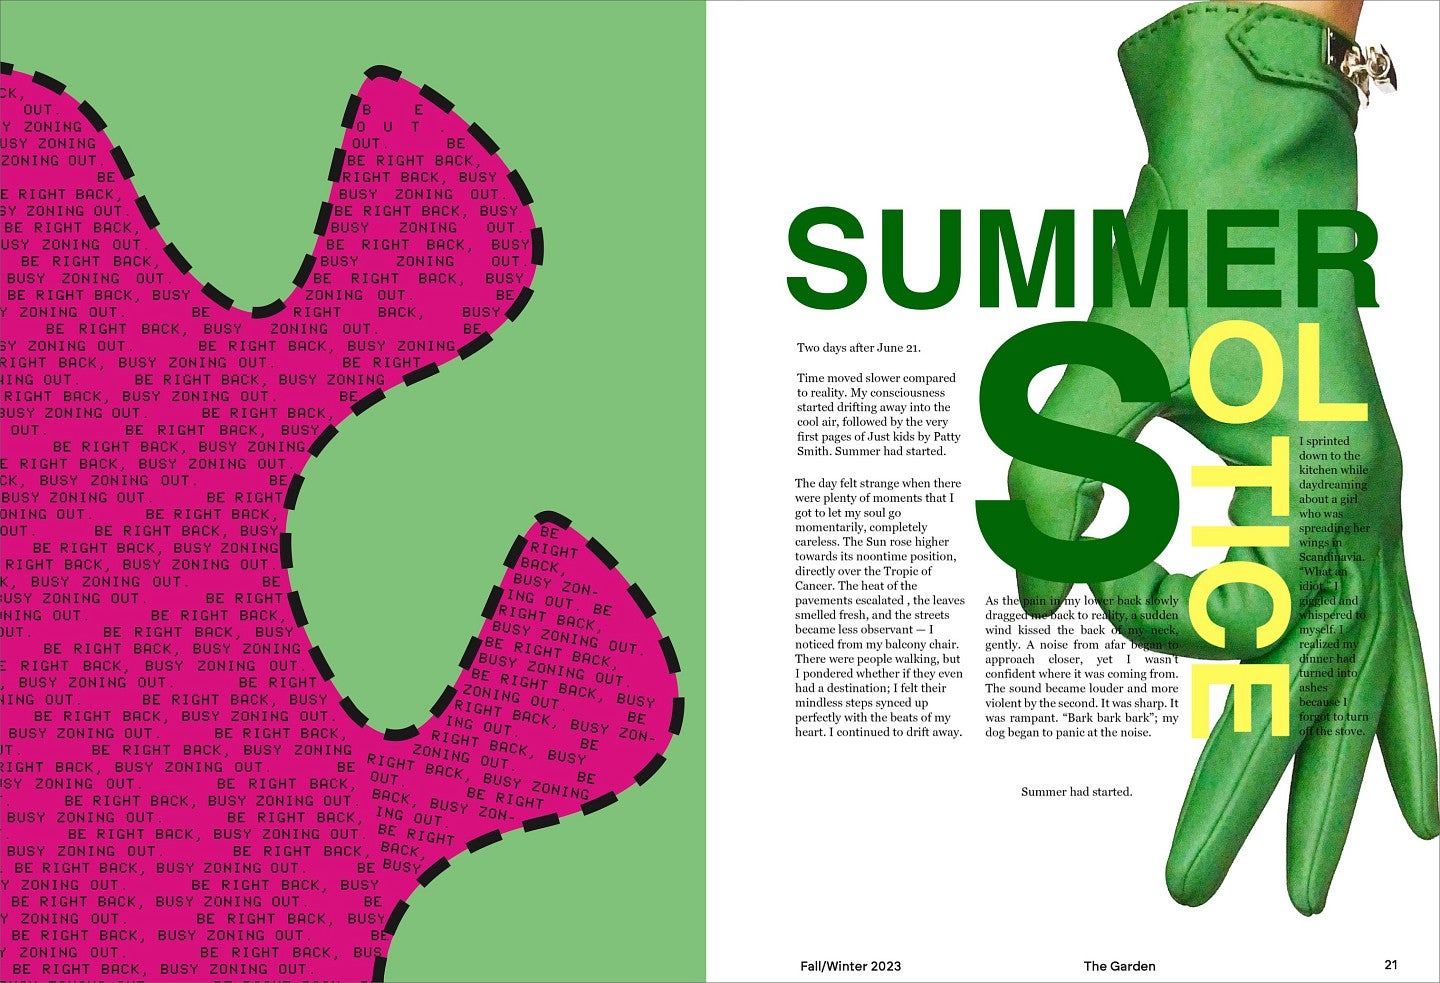 magazine spread from The Garden by Charlie Nguyen with the headline "Summer Solstice""